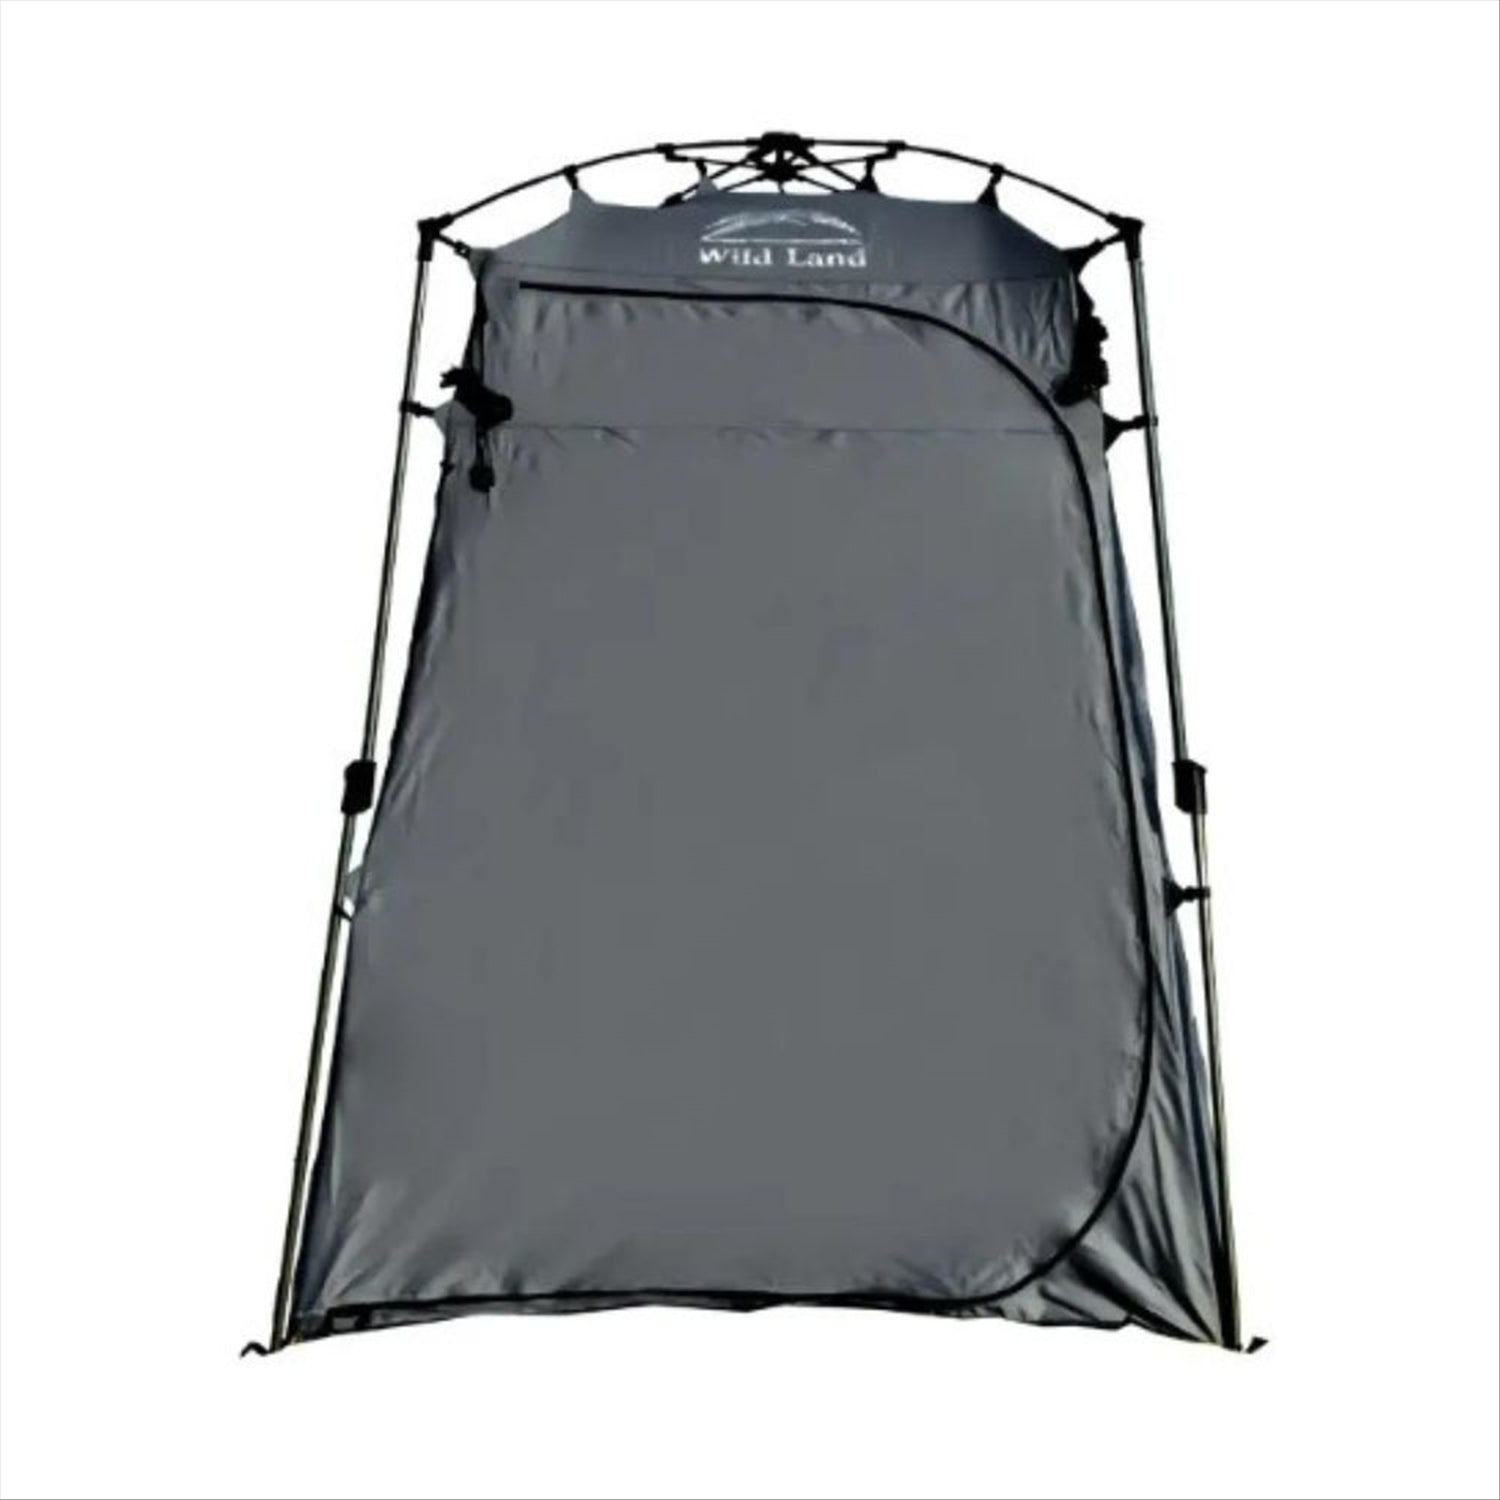 Wild Land Wild Land Shower - Changing Tent with easy pitch Auto-Up System